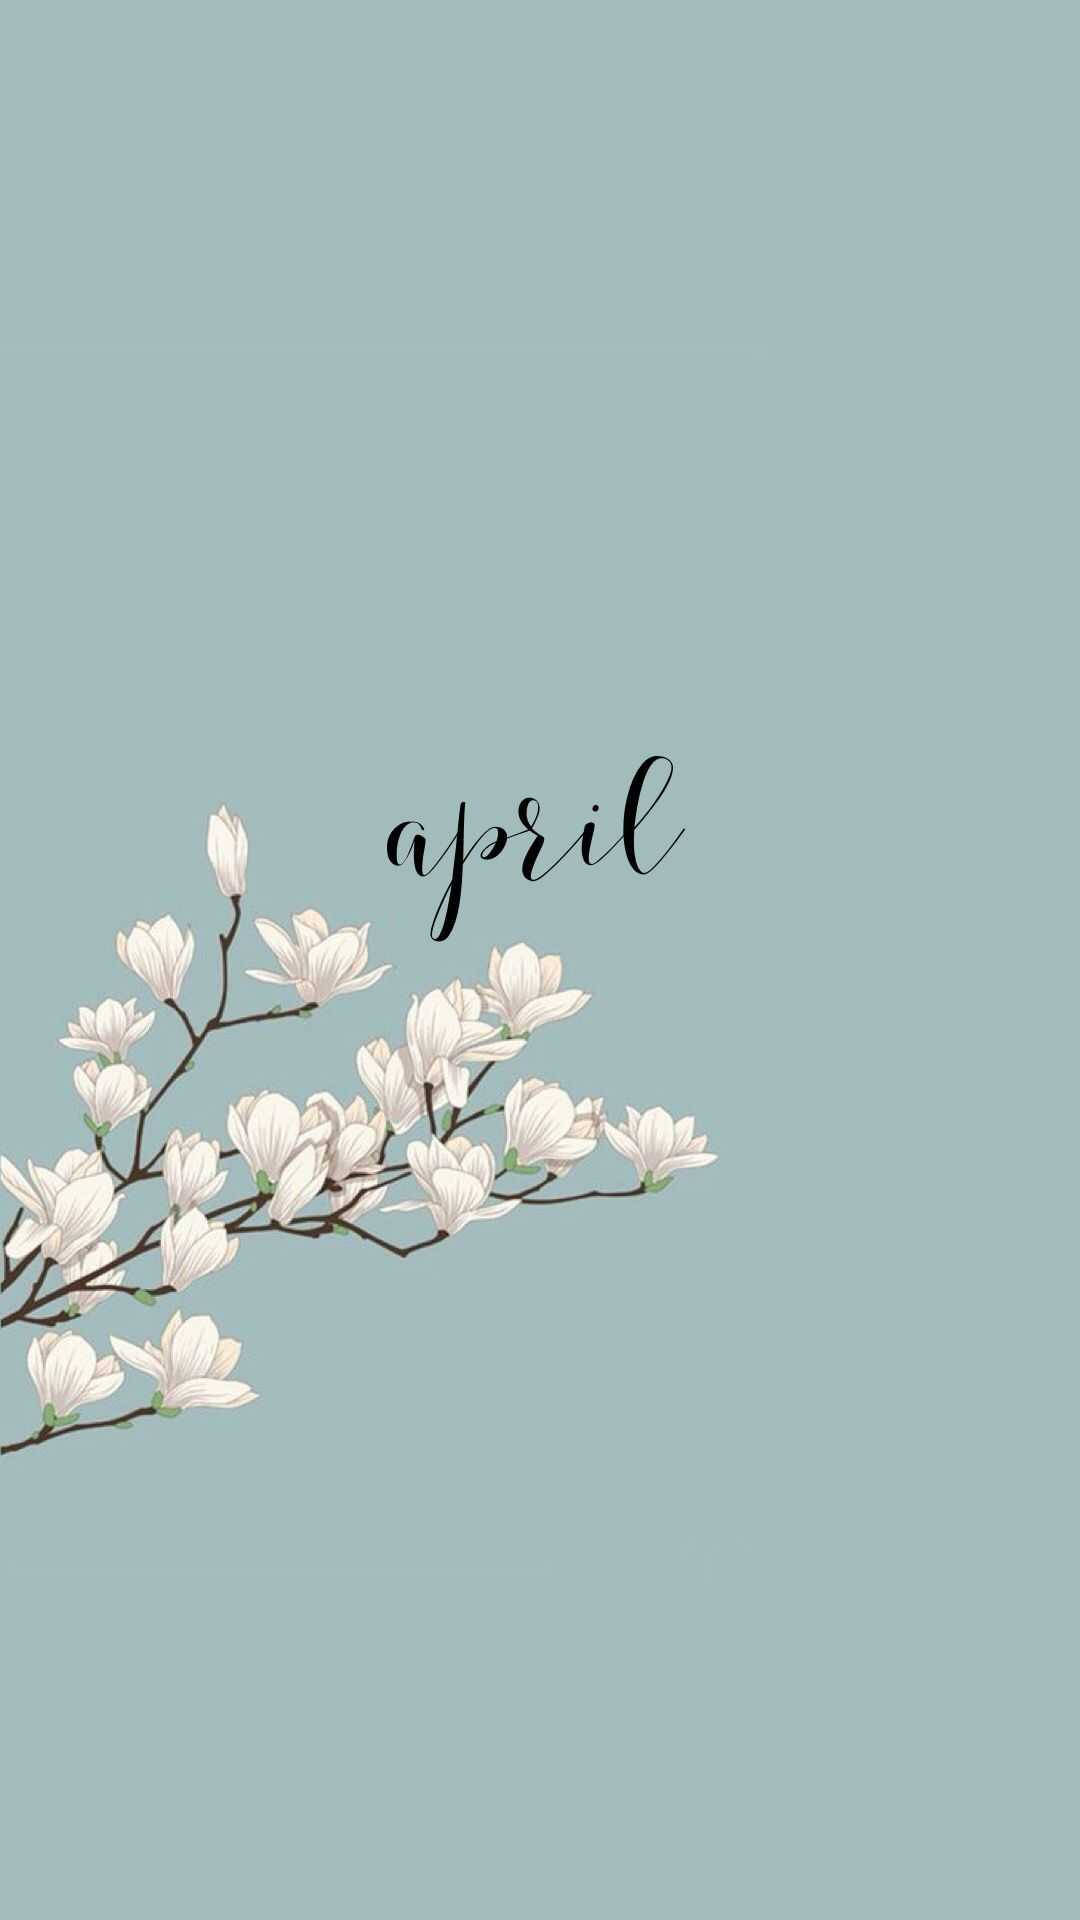 April Spring Aesthetic Background